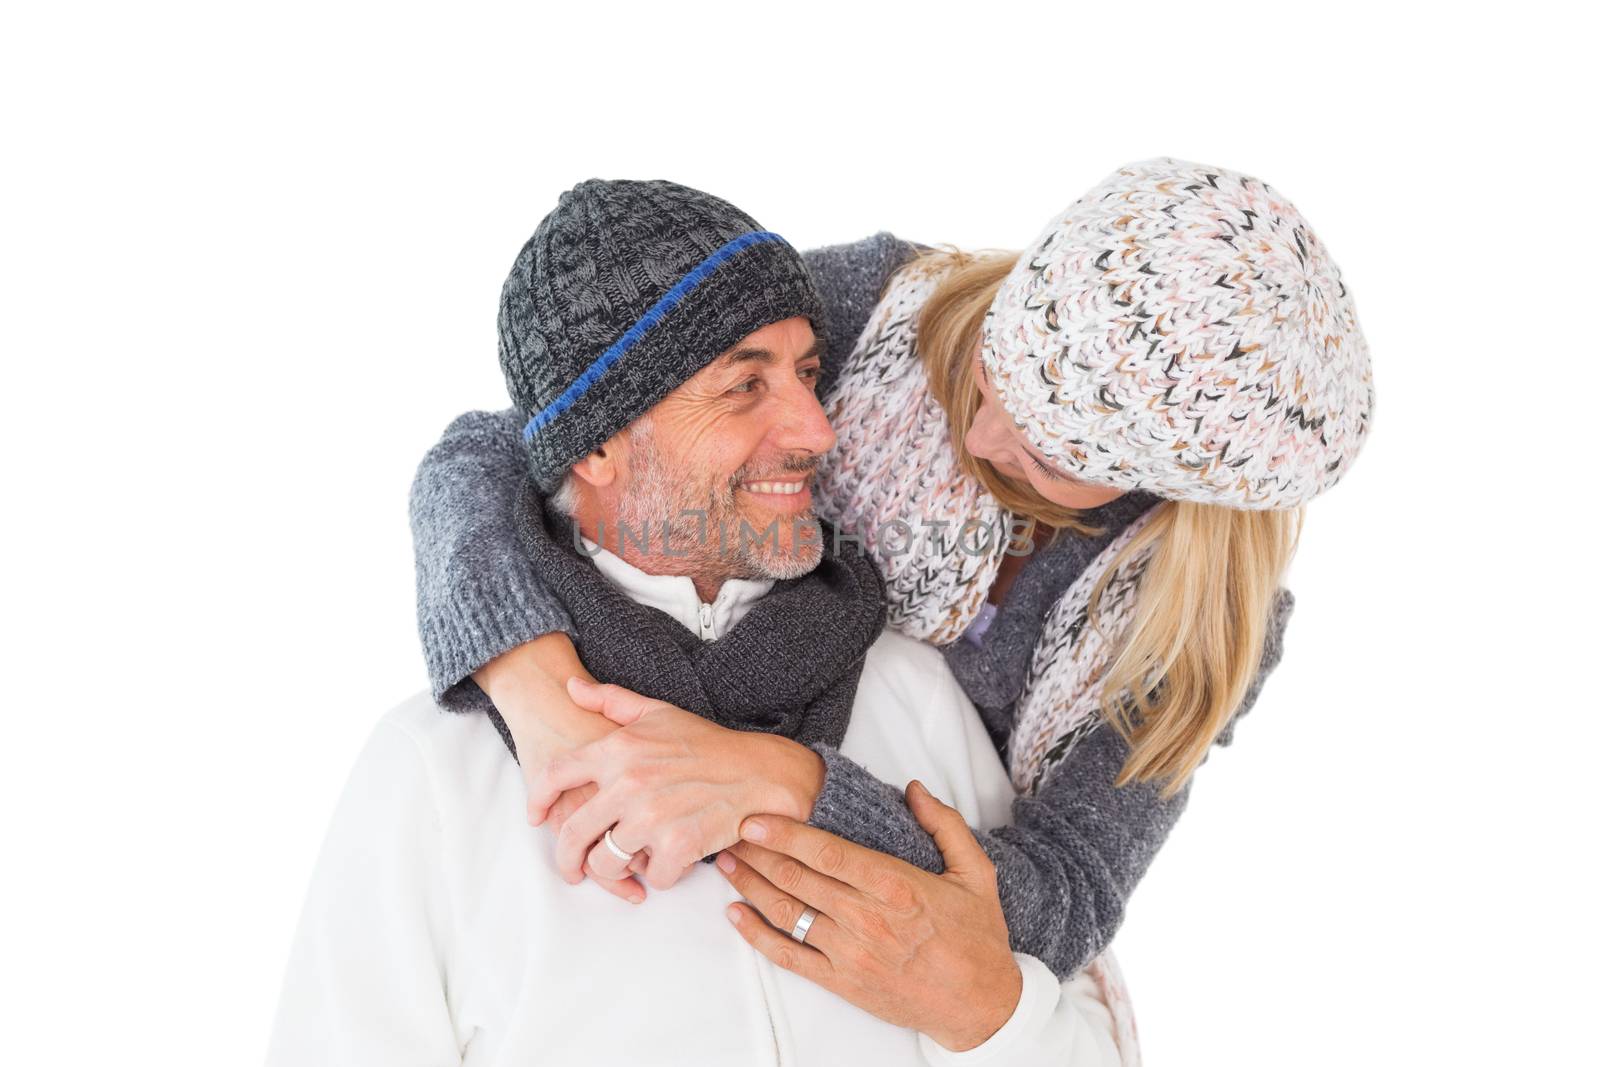 Happy couple in winter fashion embracing on white background